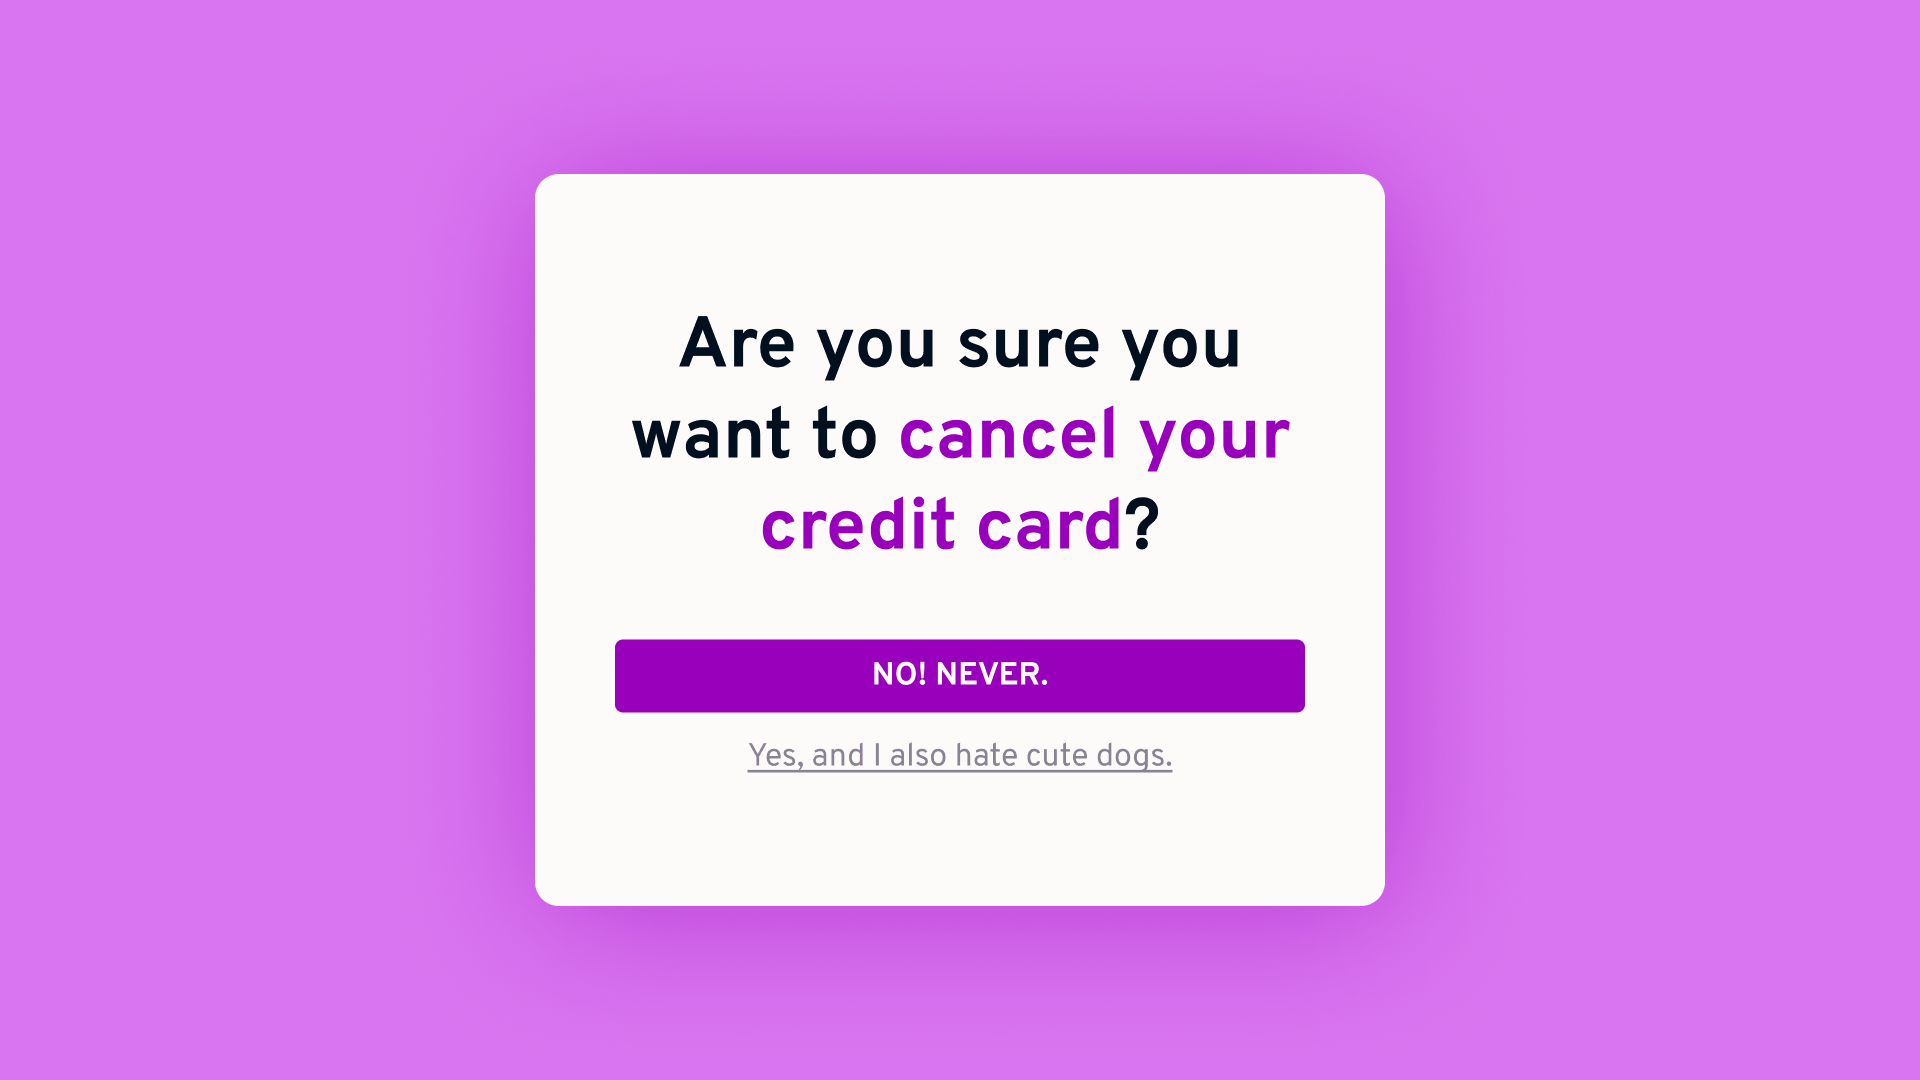 An image simulating a cancelation screen. It says “Are you sure you want to cancel your credit cart”. A big button says “No, never”. Below it there’s a tiny link “Yes, and I also hate cute dogs”.